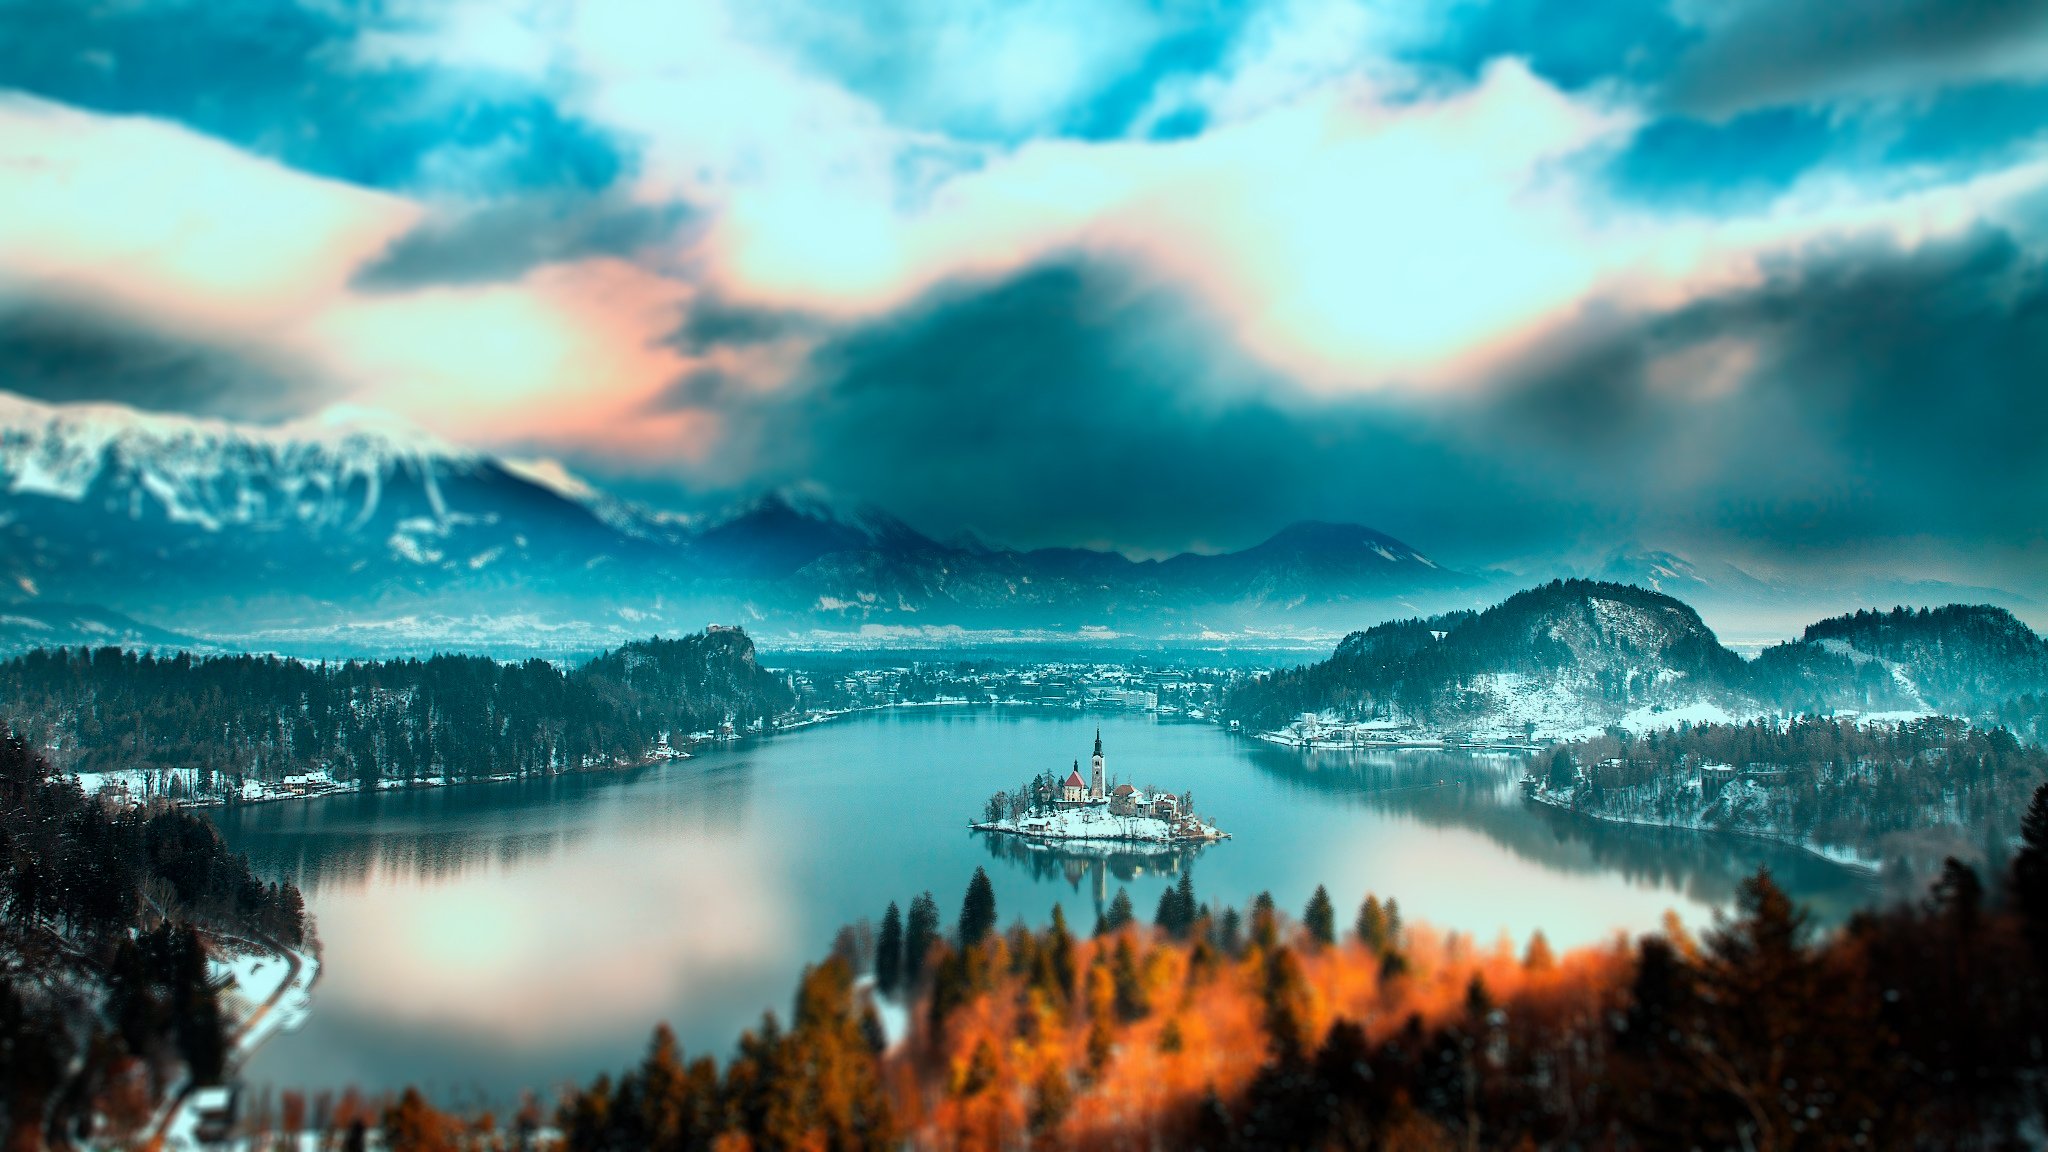 slovenia, Bled, Lake, Slovenia, Lake, Bled, Mountain, Forest, Trees, Island, Church, Home, Lake, Water, Snow, Winter, Sky, Clouds, Landscape, Nature Wallpaper